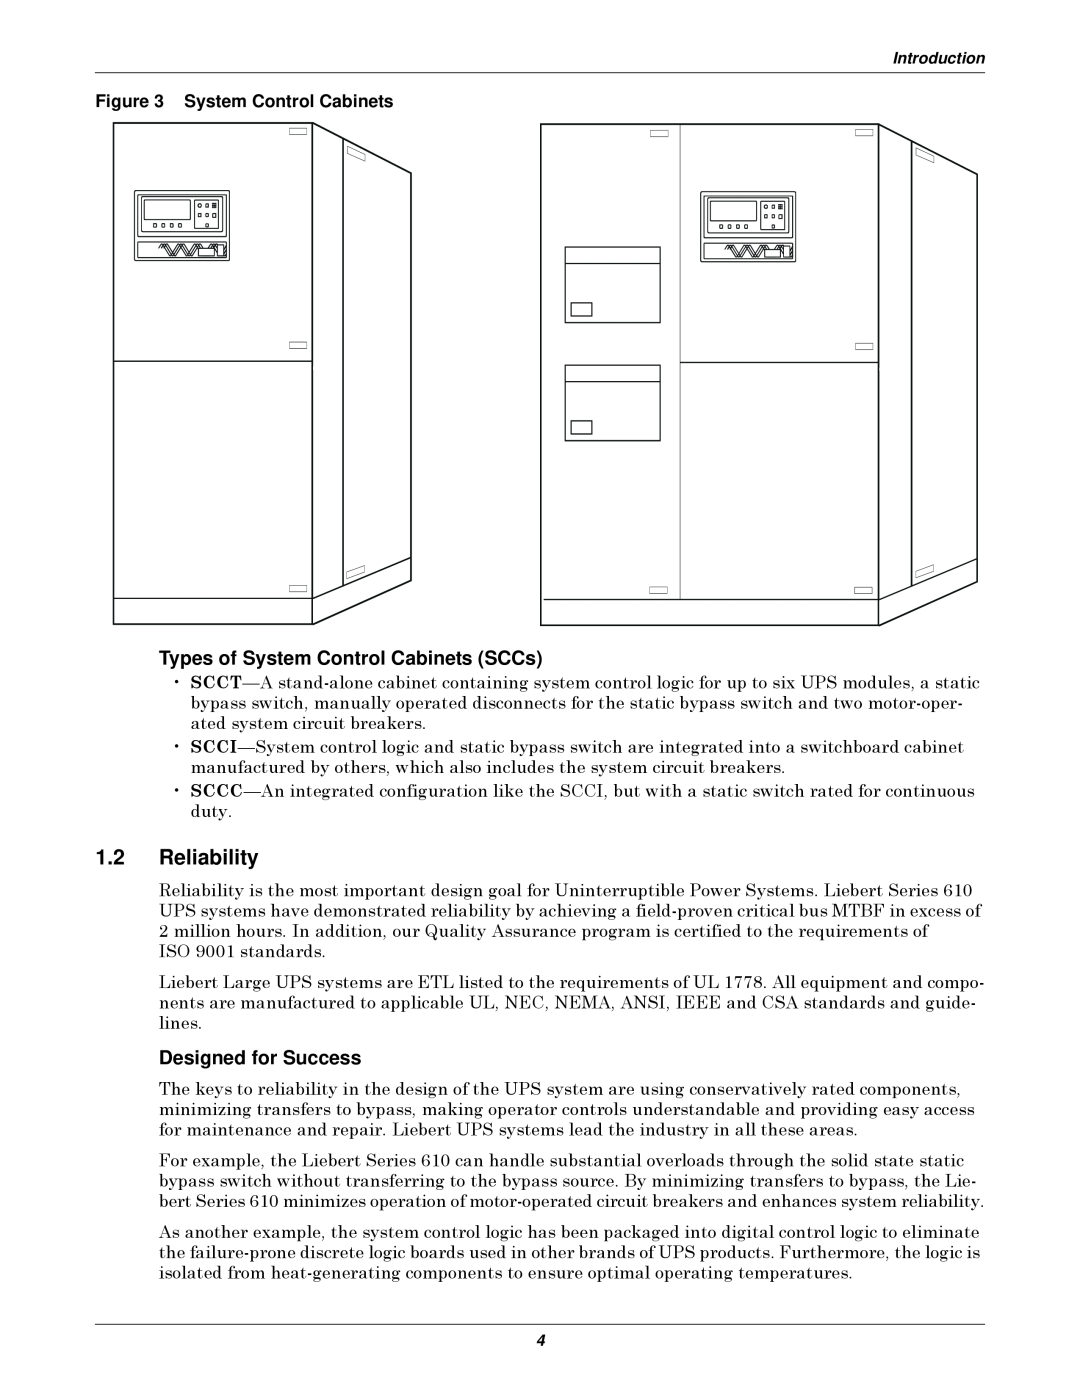 Emerson Series 610 manual Reliability, Types of System Control Cabinets SCCs, Designed for Success 